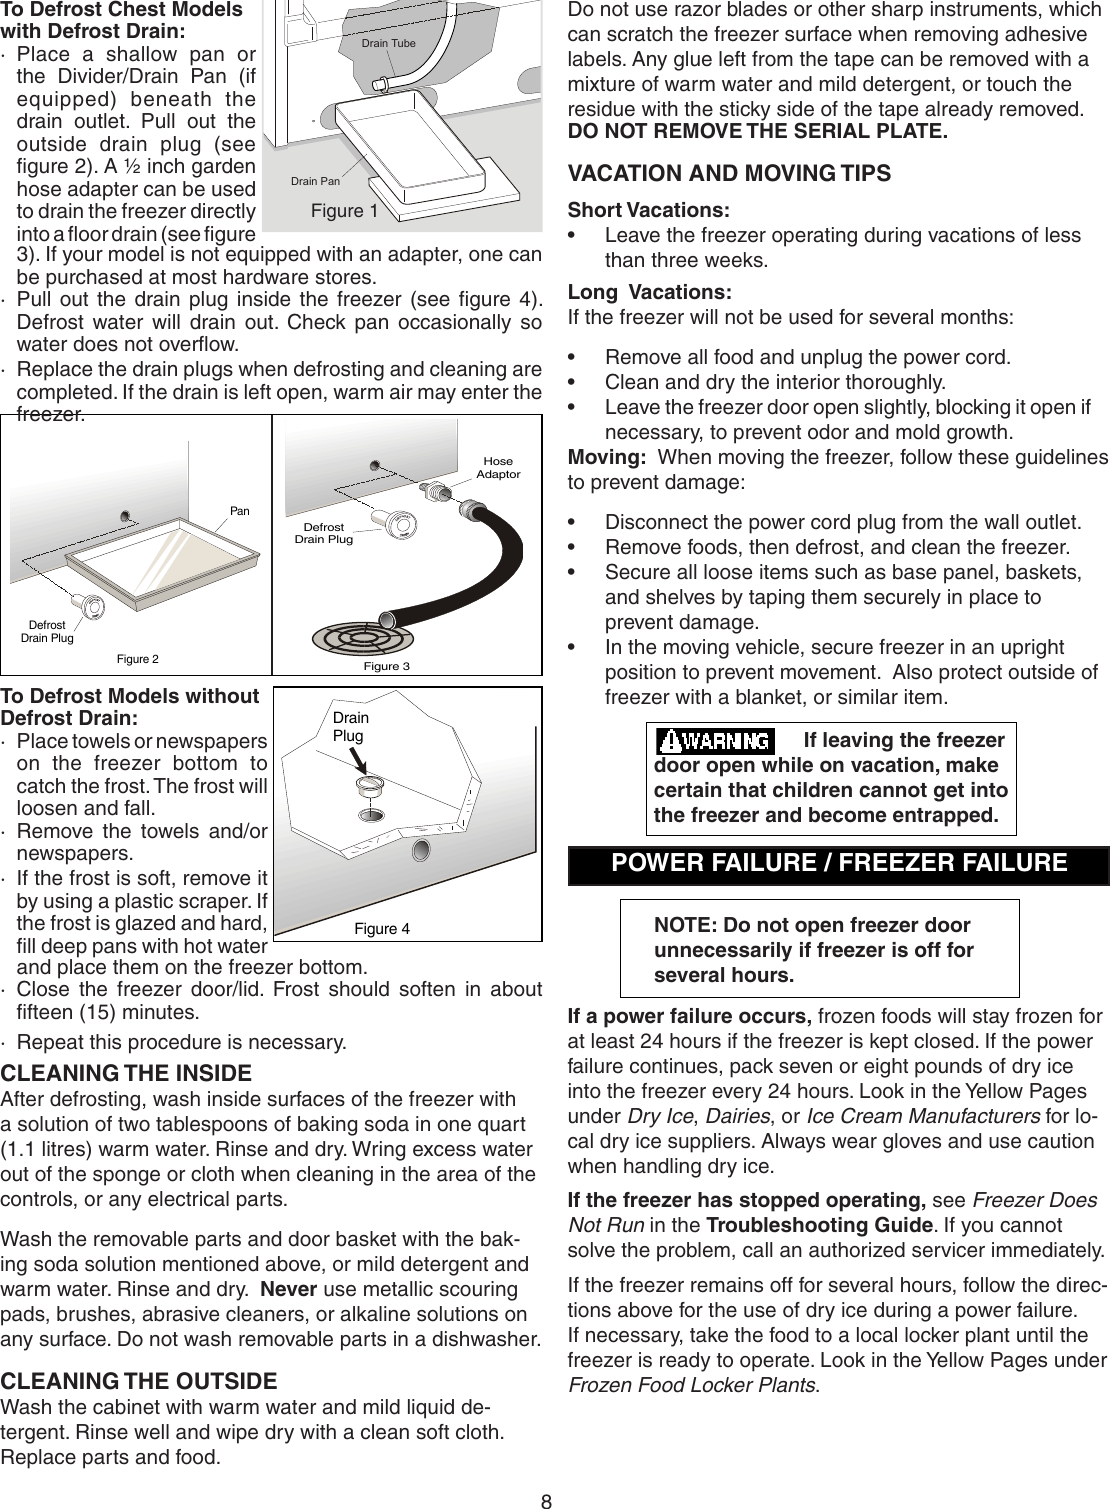 Page 8 of 11 - Crosley Crosley-Defrost--Owner-S-Manual